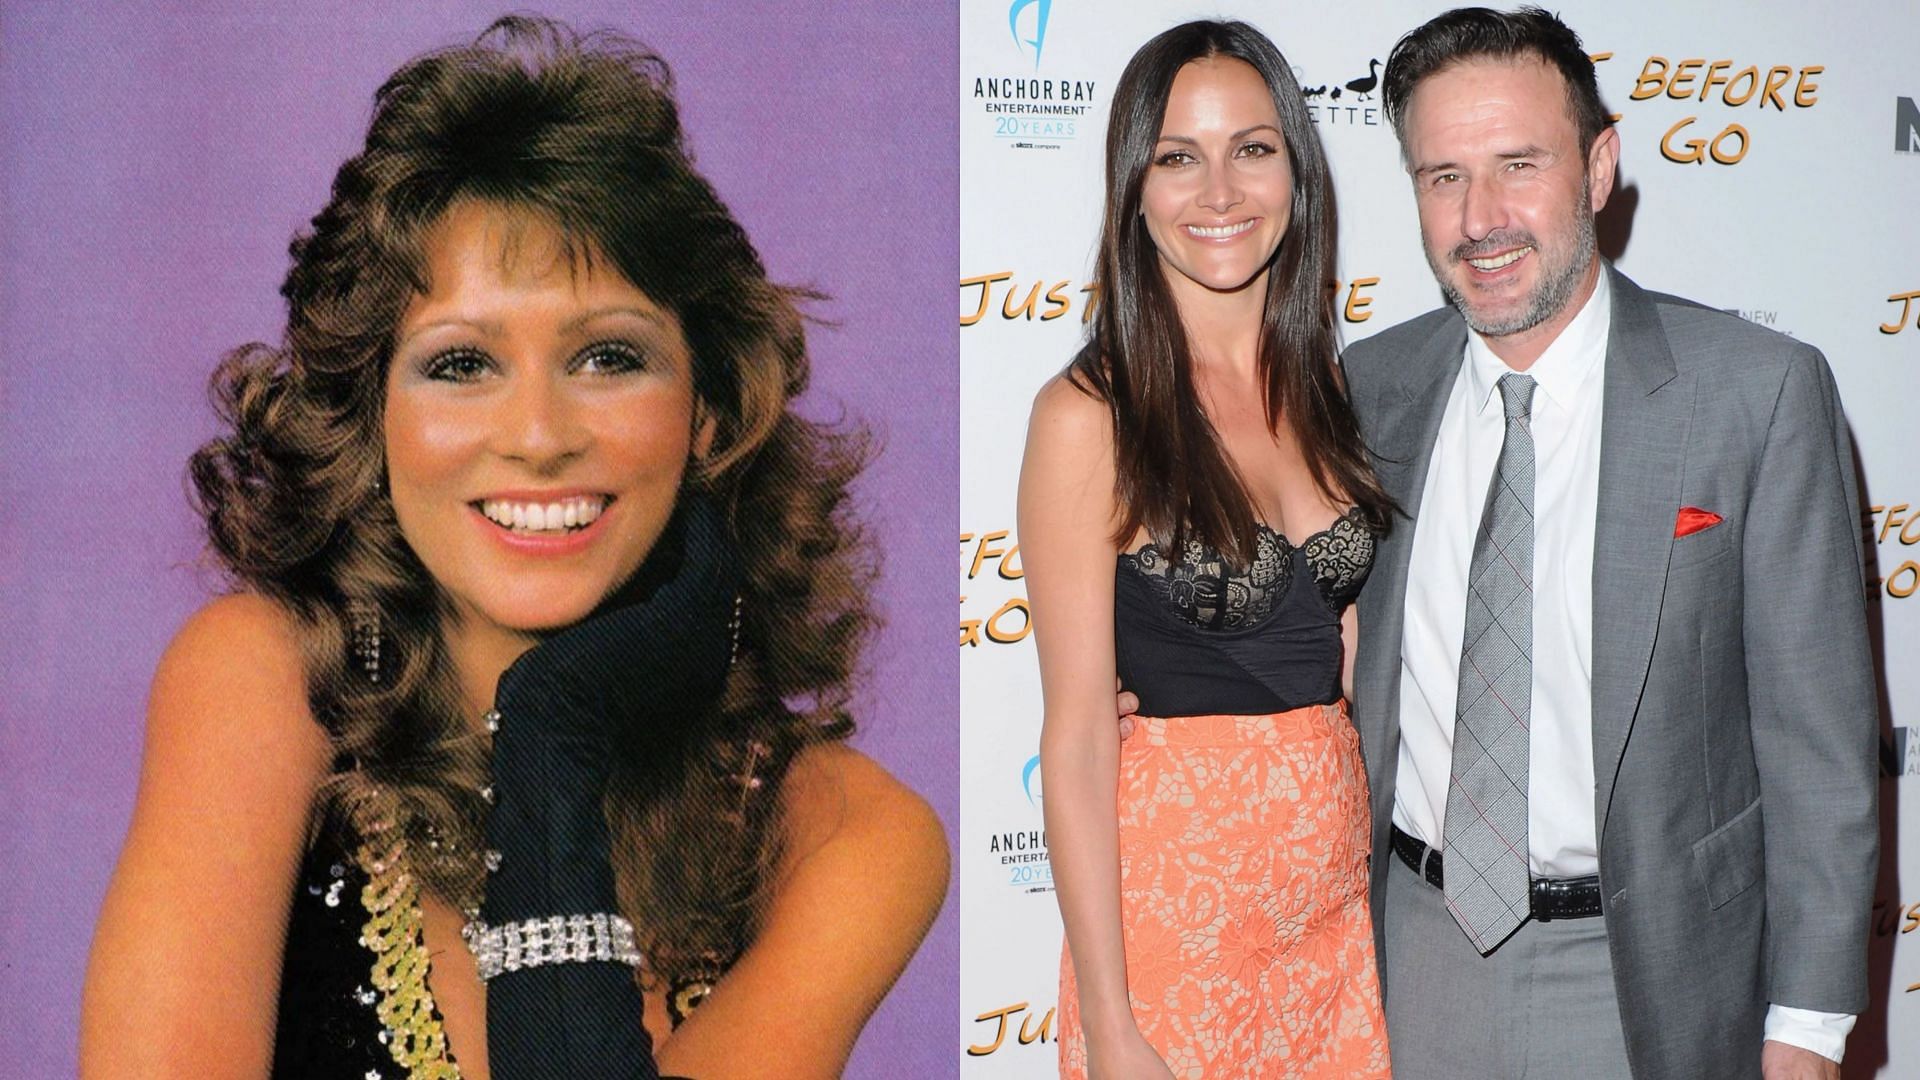 Miss Elizabeth (left) and David Arquette with his wife, Christina McLarty (right)